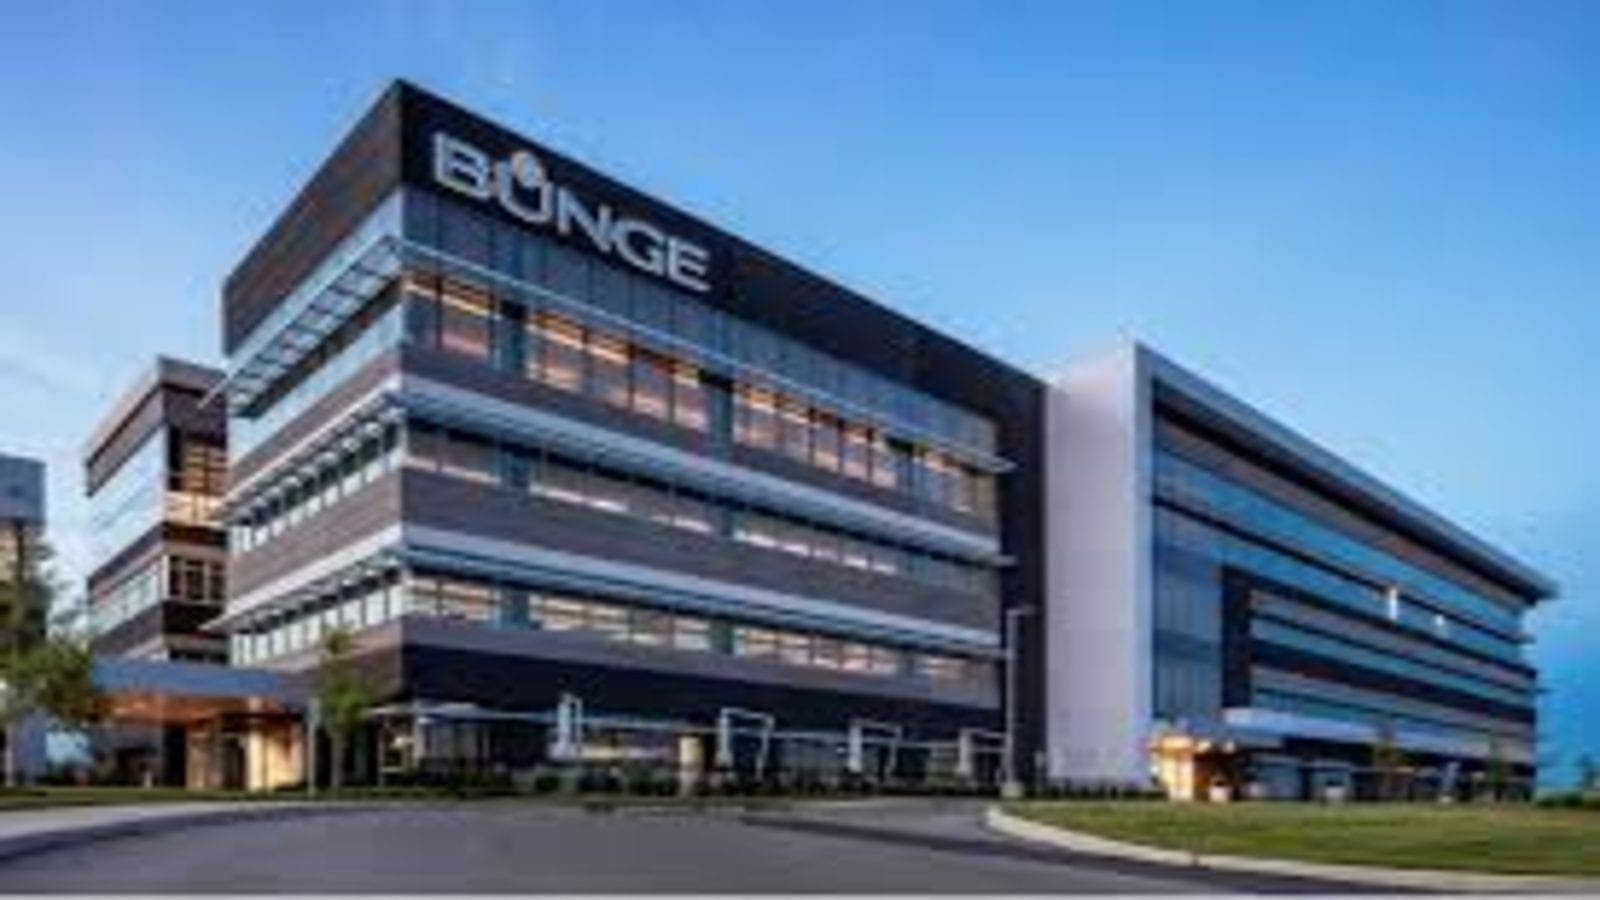 Bunge raises full year outlook as Ardent Mills’ earnings rise sharply in Q2